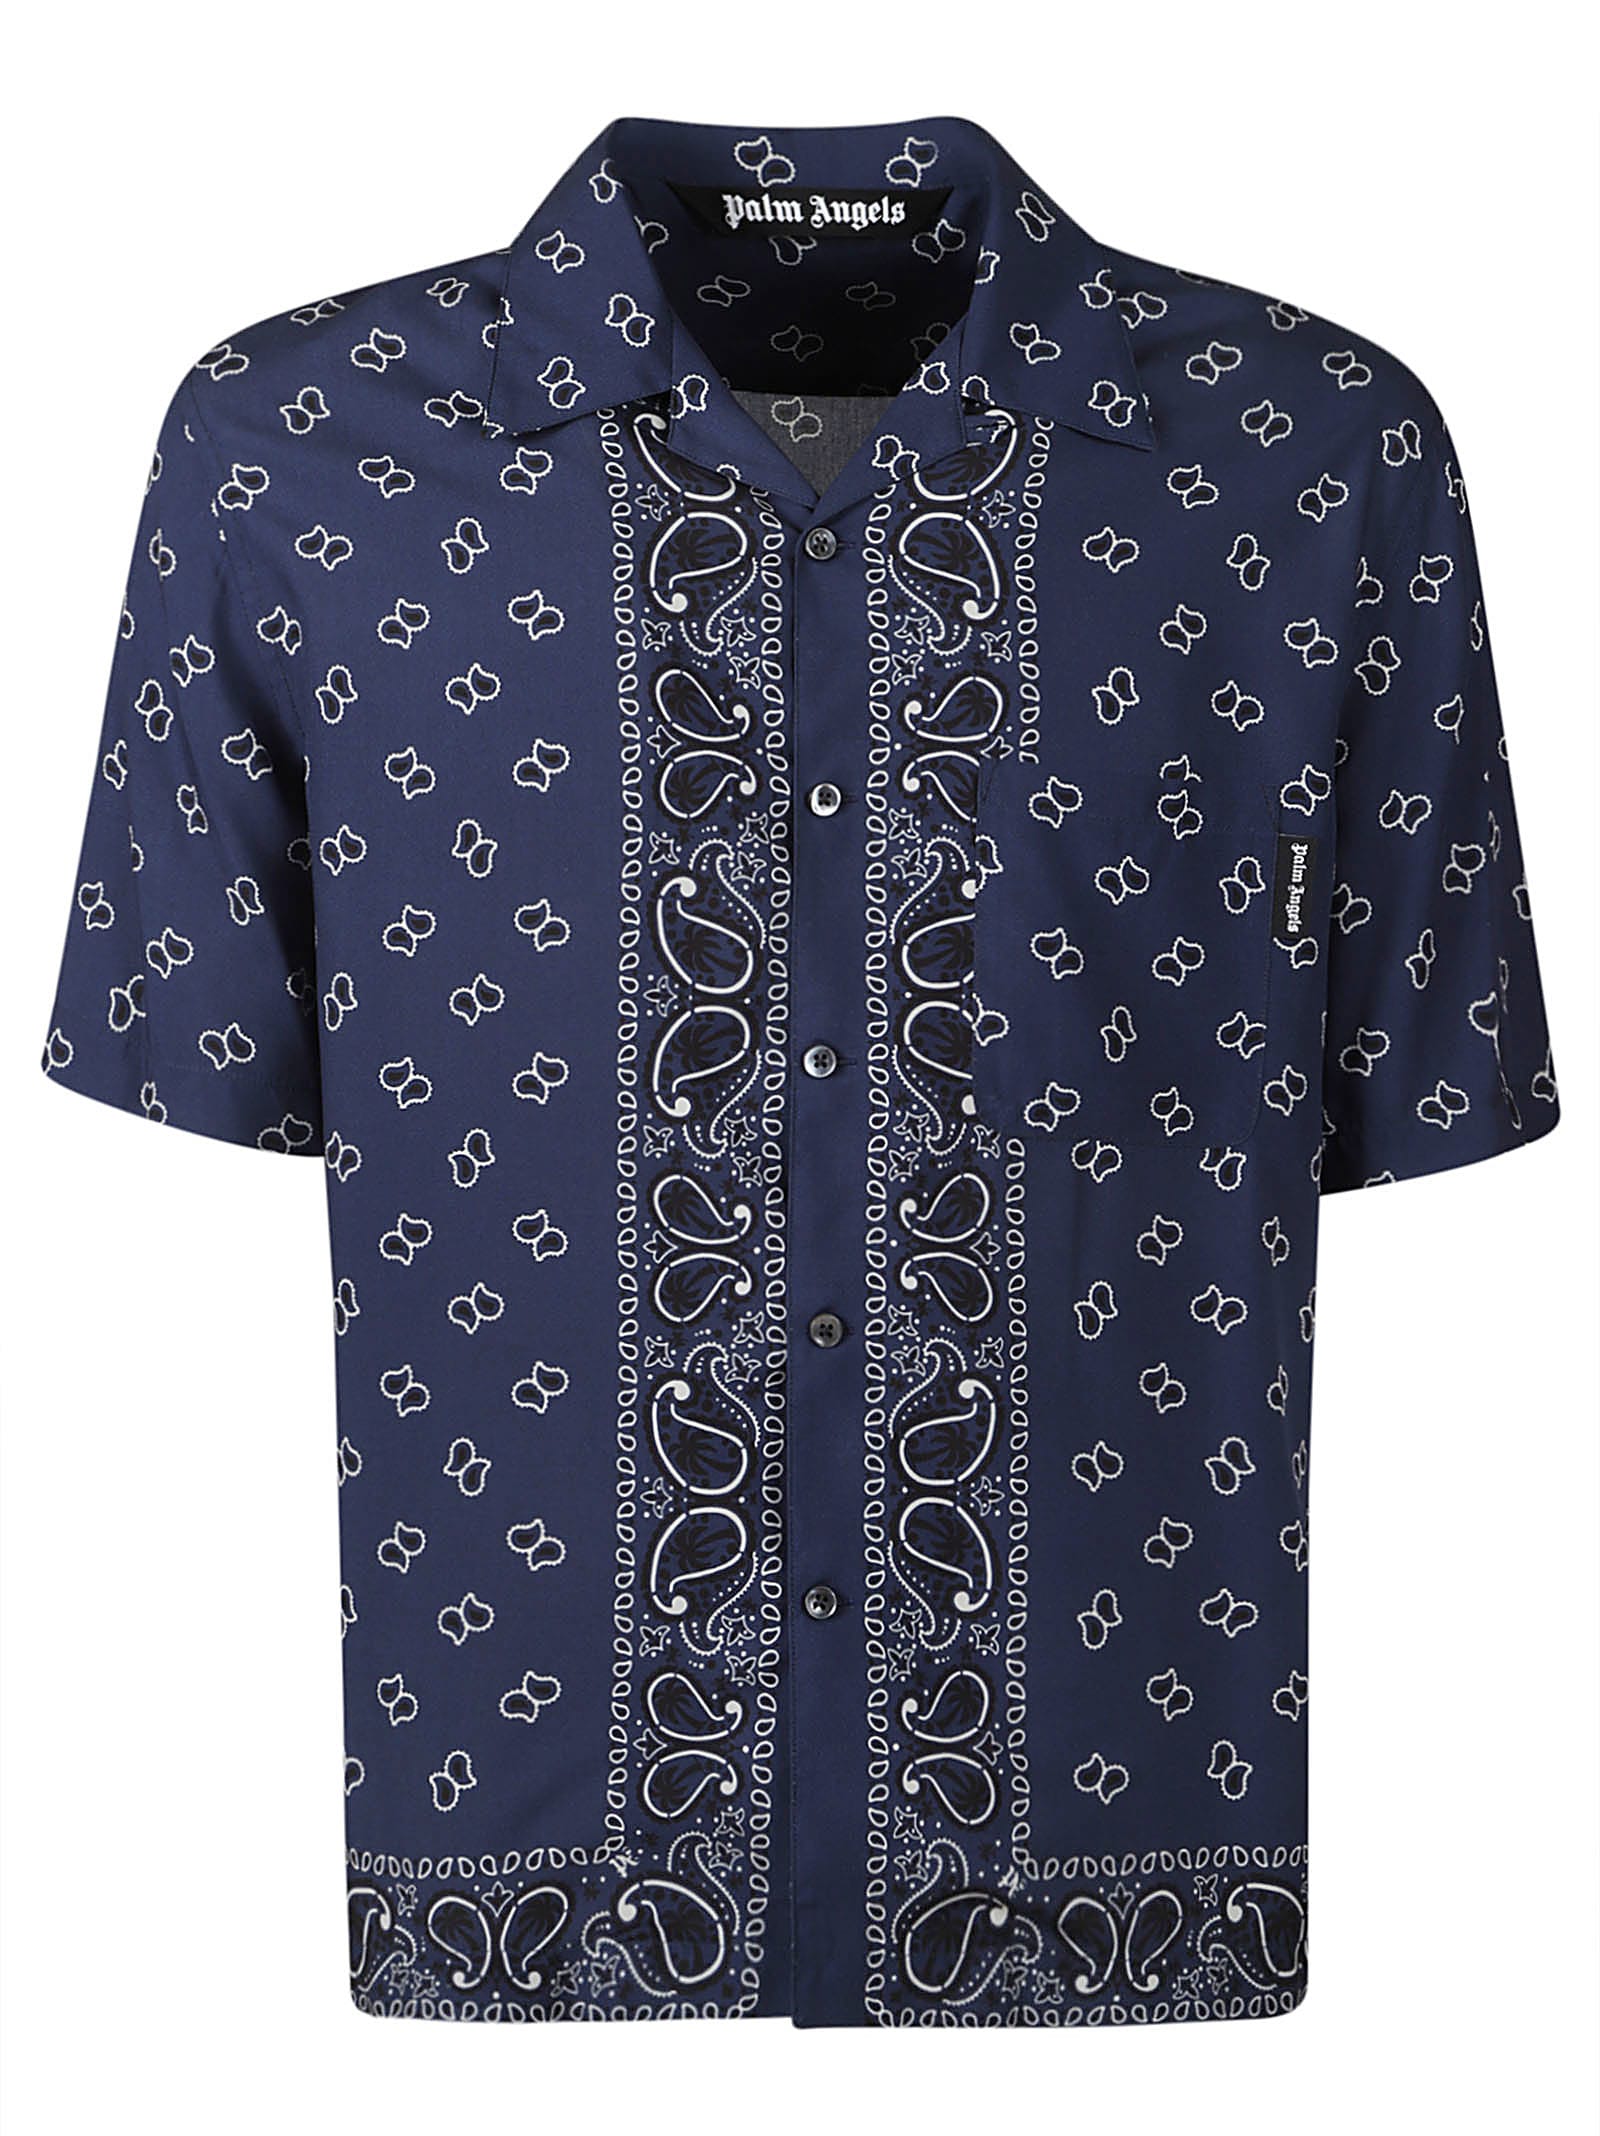 Palm Angels Paisley Bowling Shirt In Navy Blue